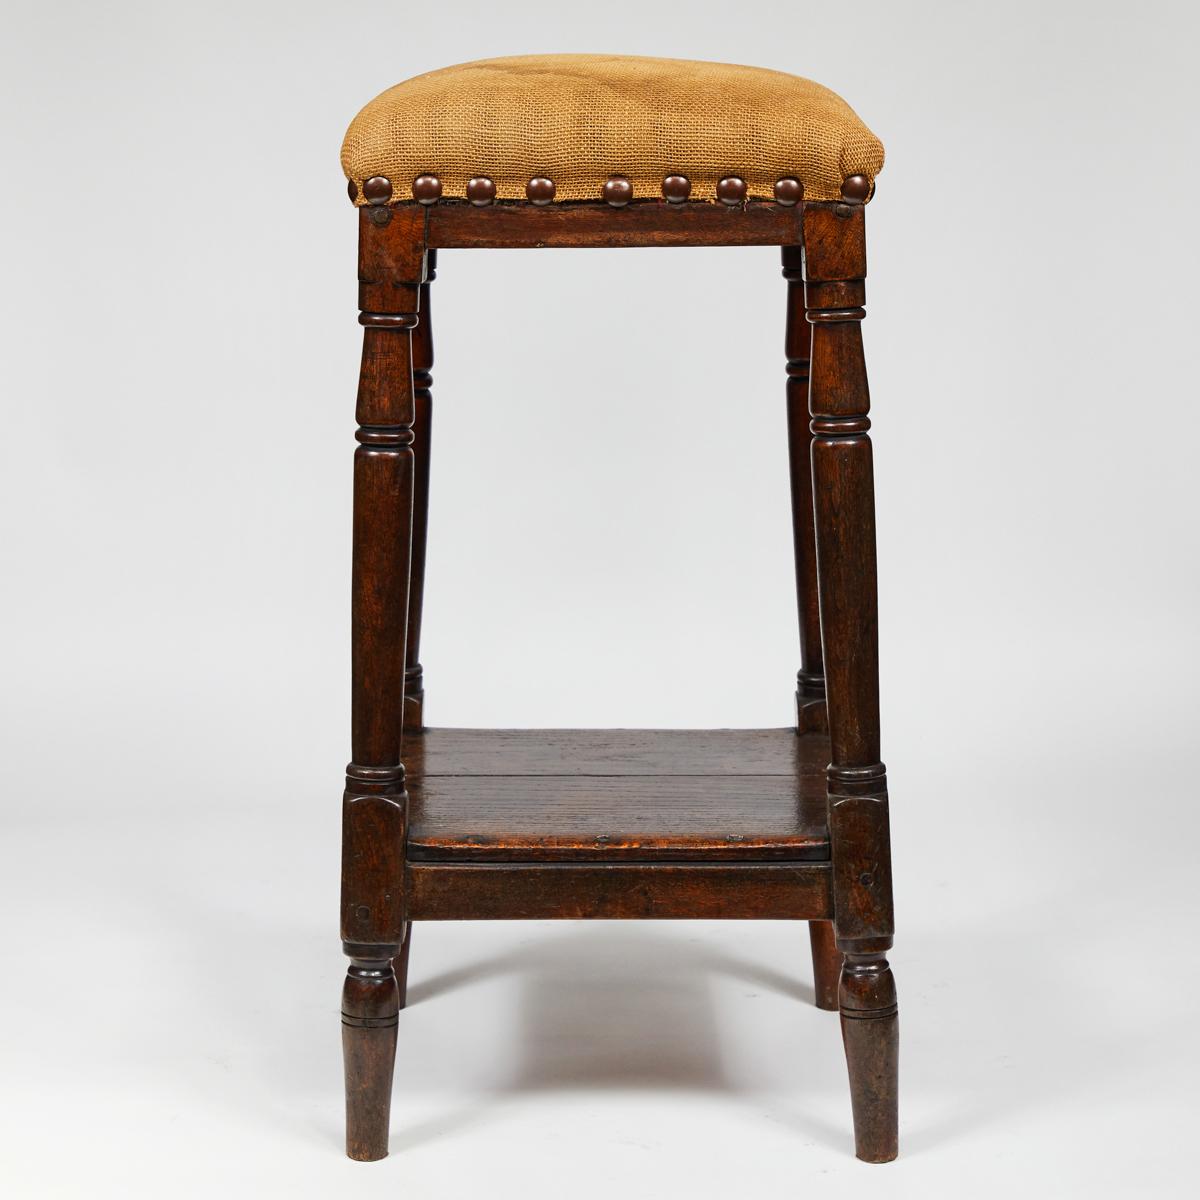 Late 19th Century Tall Upholstered English Stool with Bottom Shelf In Good Condition For Sale In Los Angeles, CA